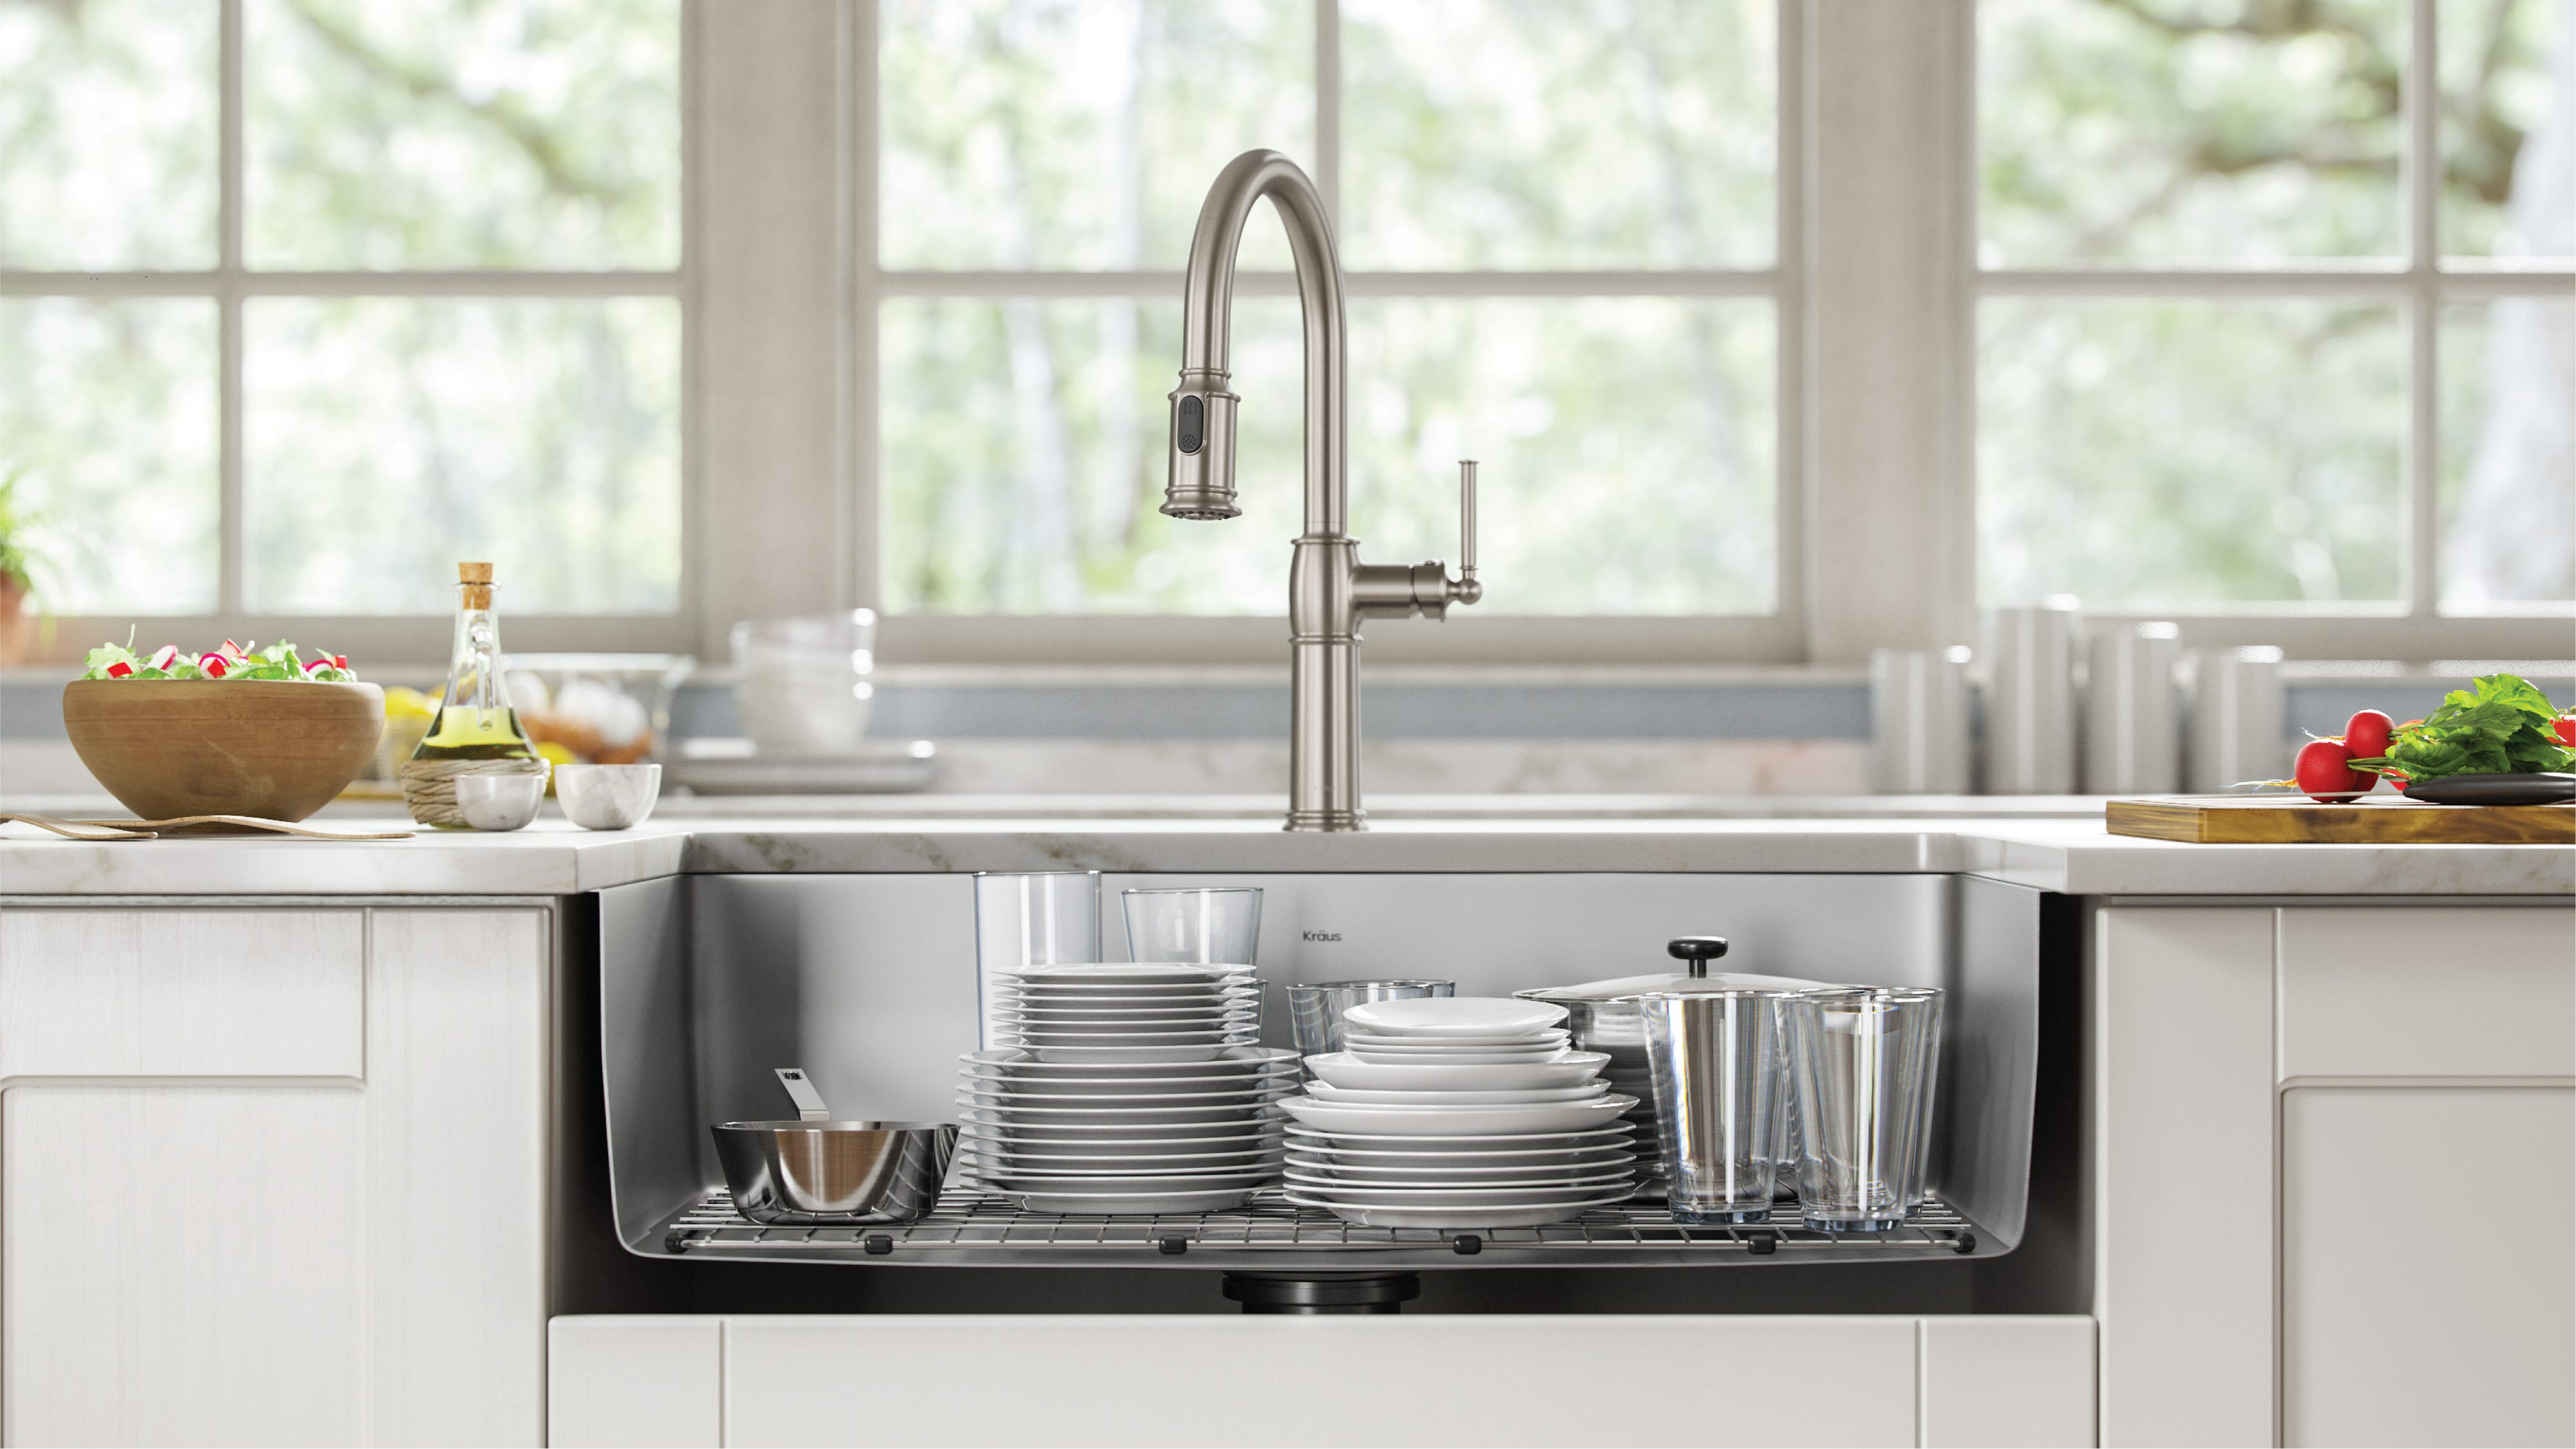 Kitchen Sinks for a Healthy Home